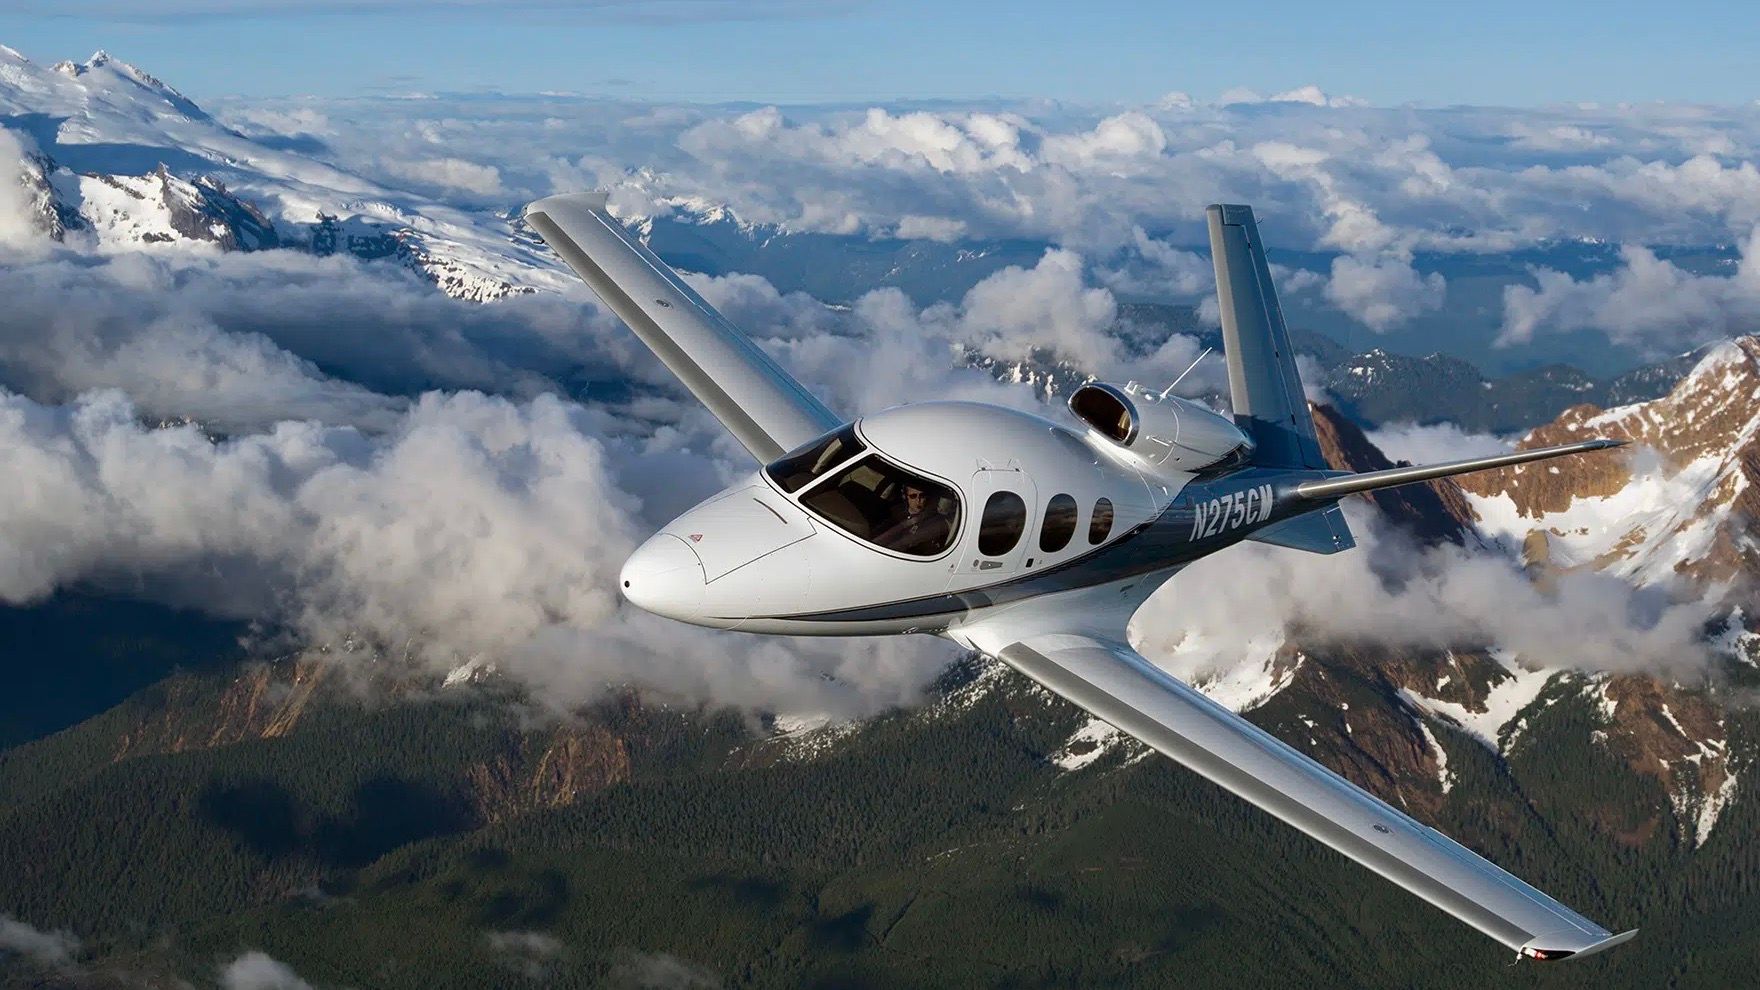 A Cirrus G2+ Vision Jet flying over mountainous terrain.